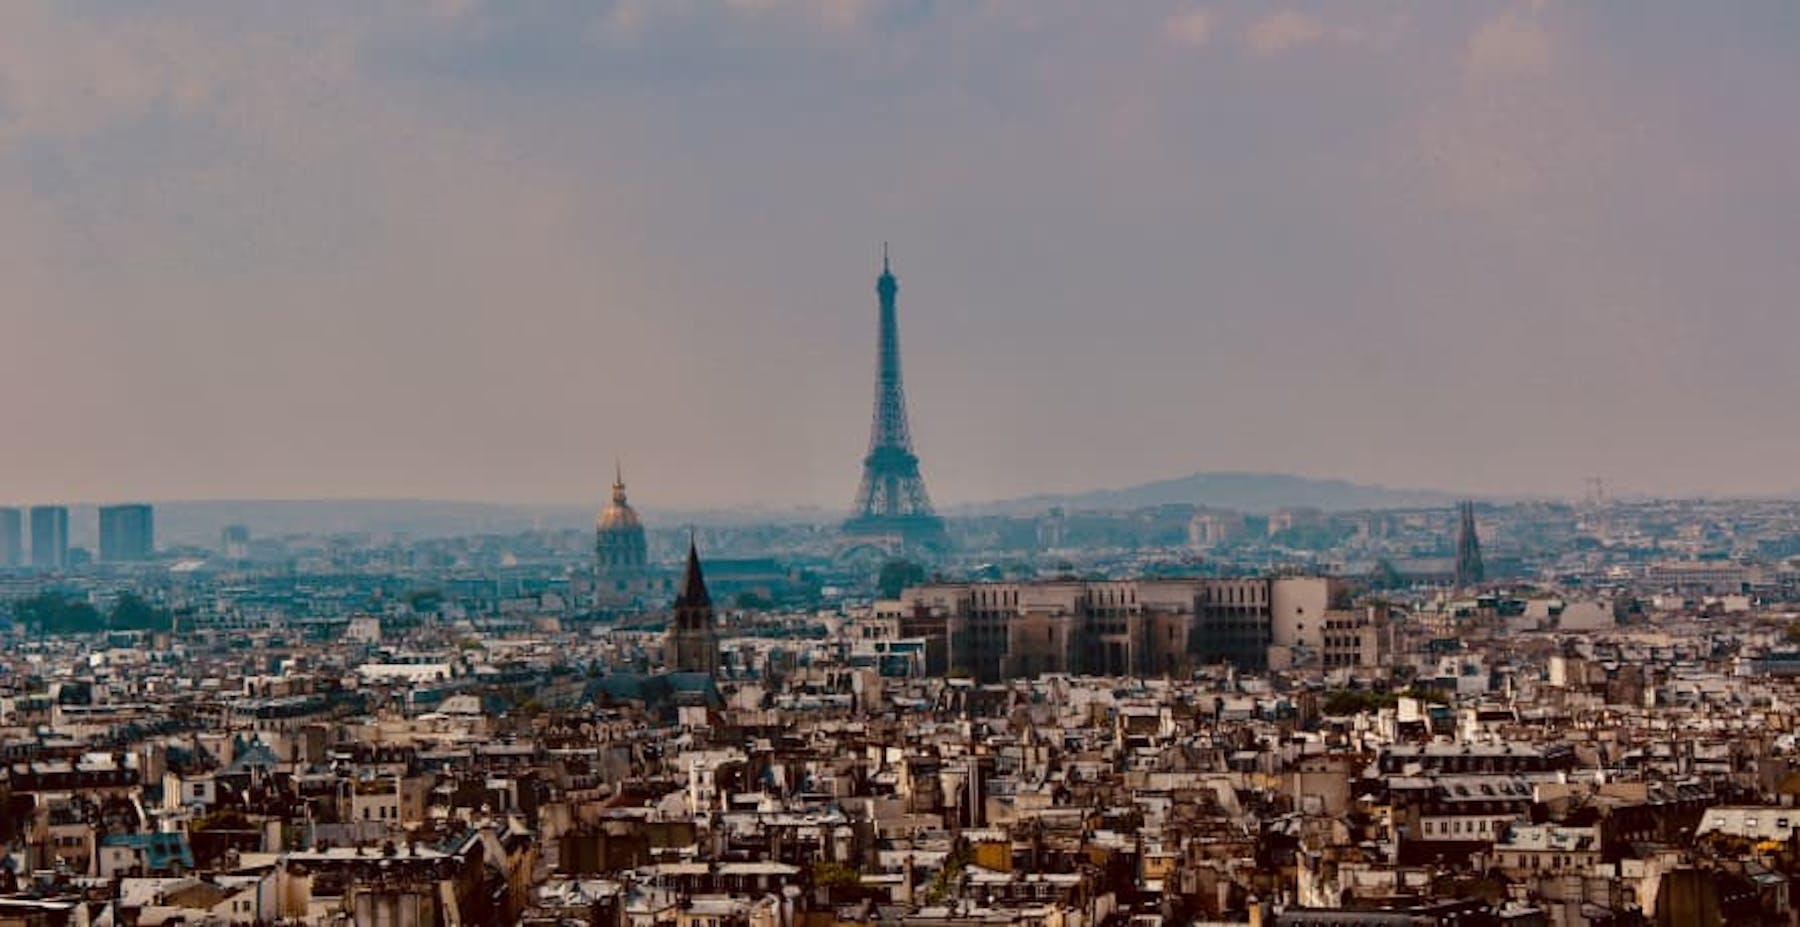 Paris with the Eiffel Tower in view